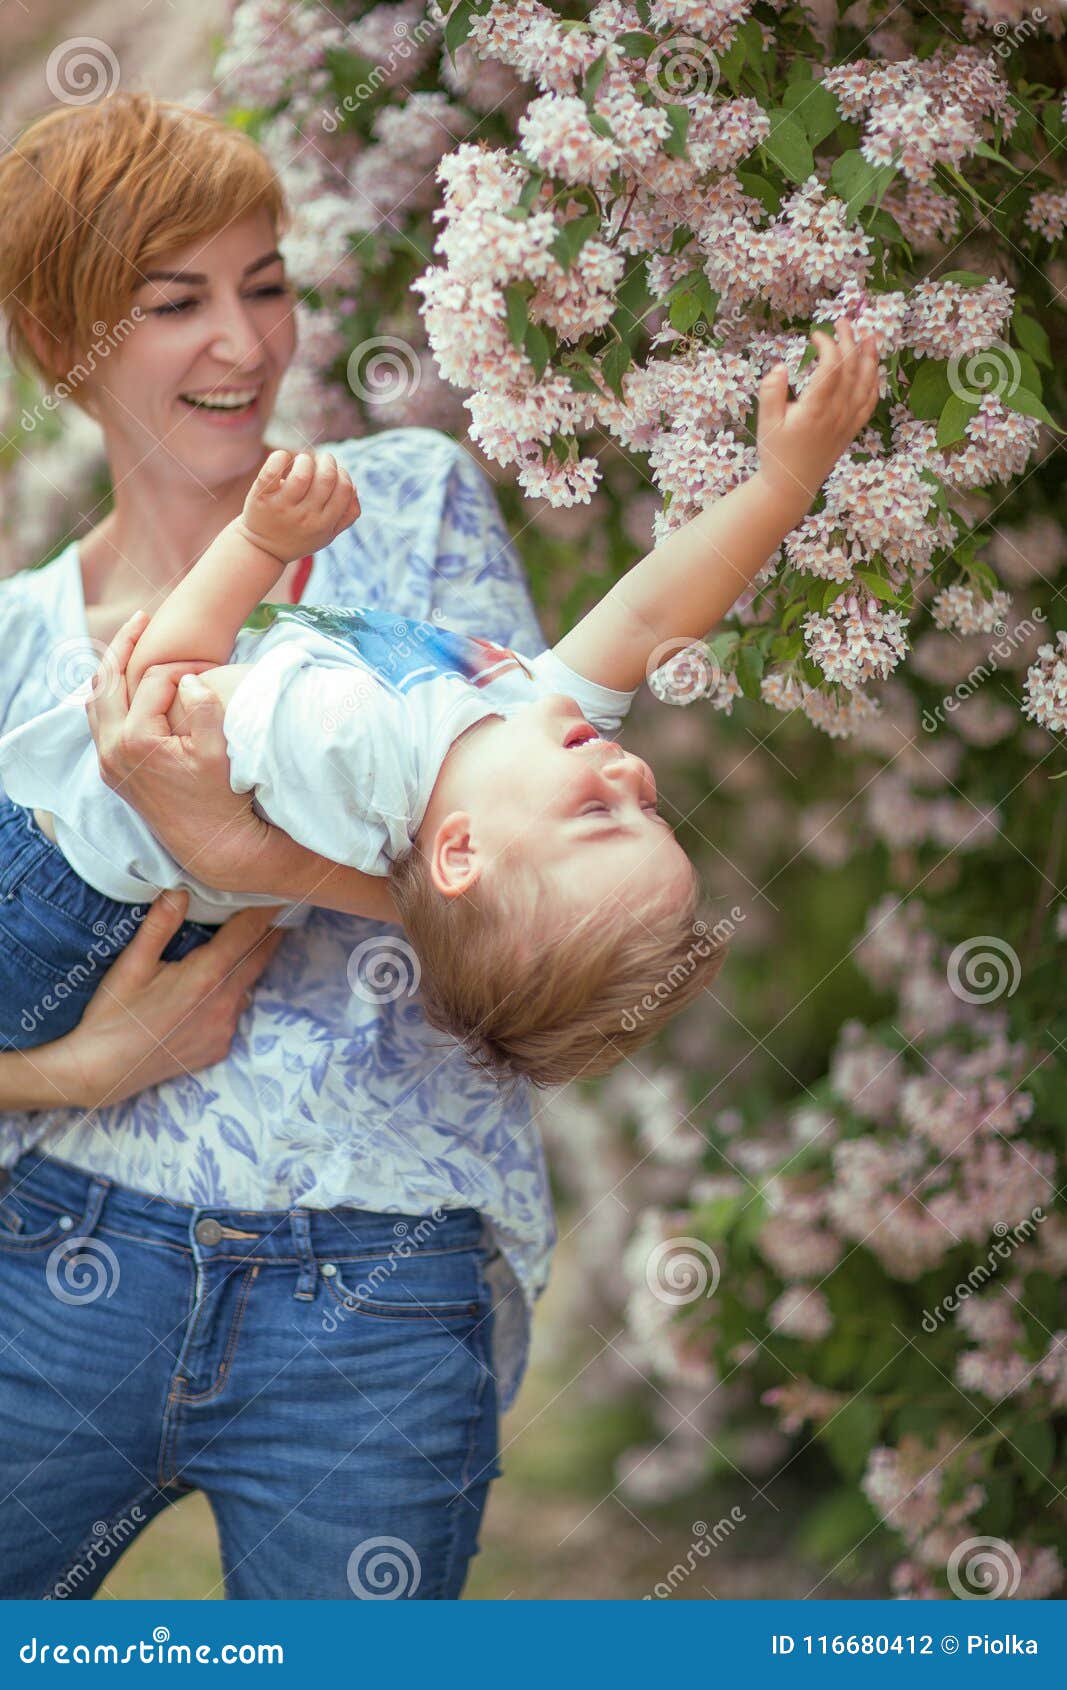 mother and son having fun together, giggle, happy and smiling